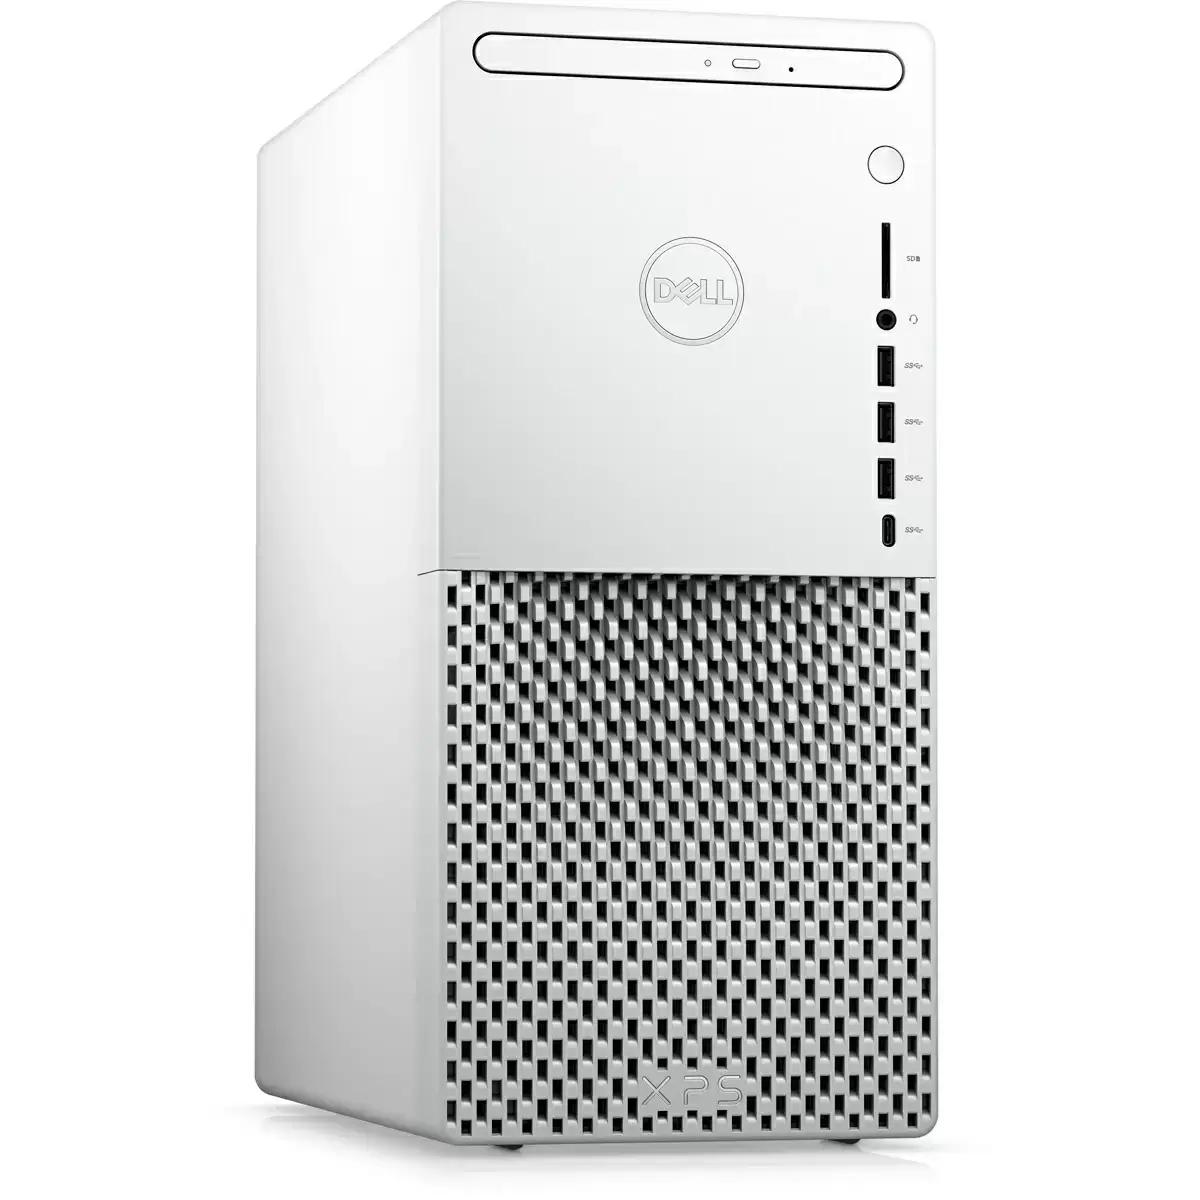 Dell XPS 8940 i7 16GB 512GB RTX 2060 Desktop Special Edition for $1099.99